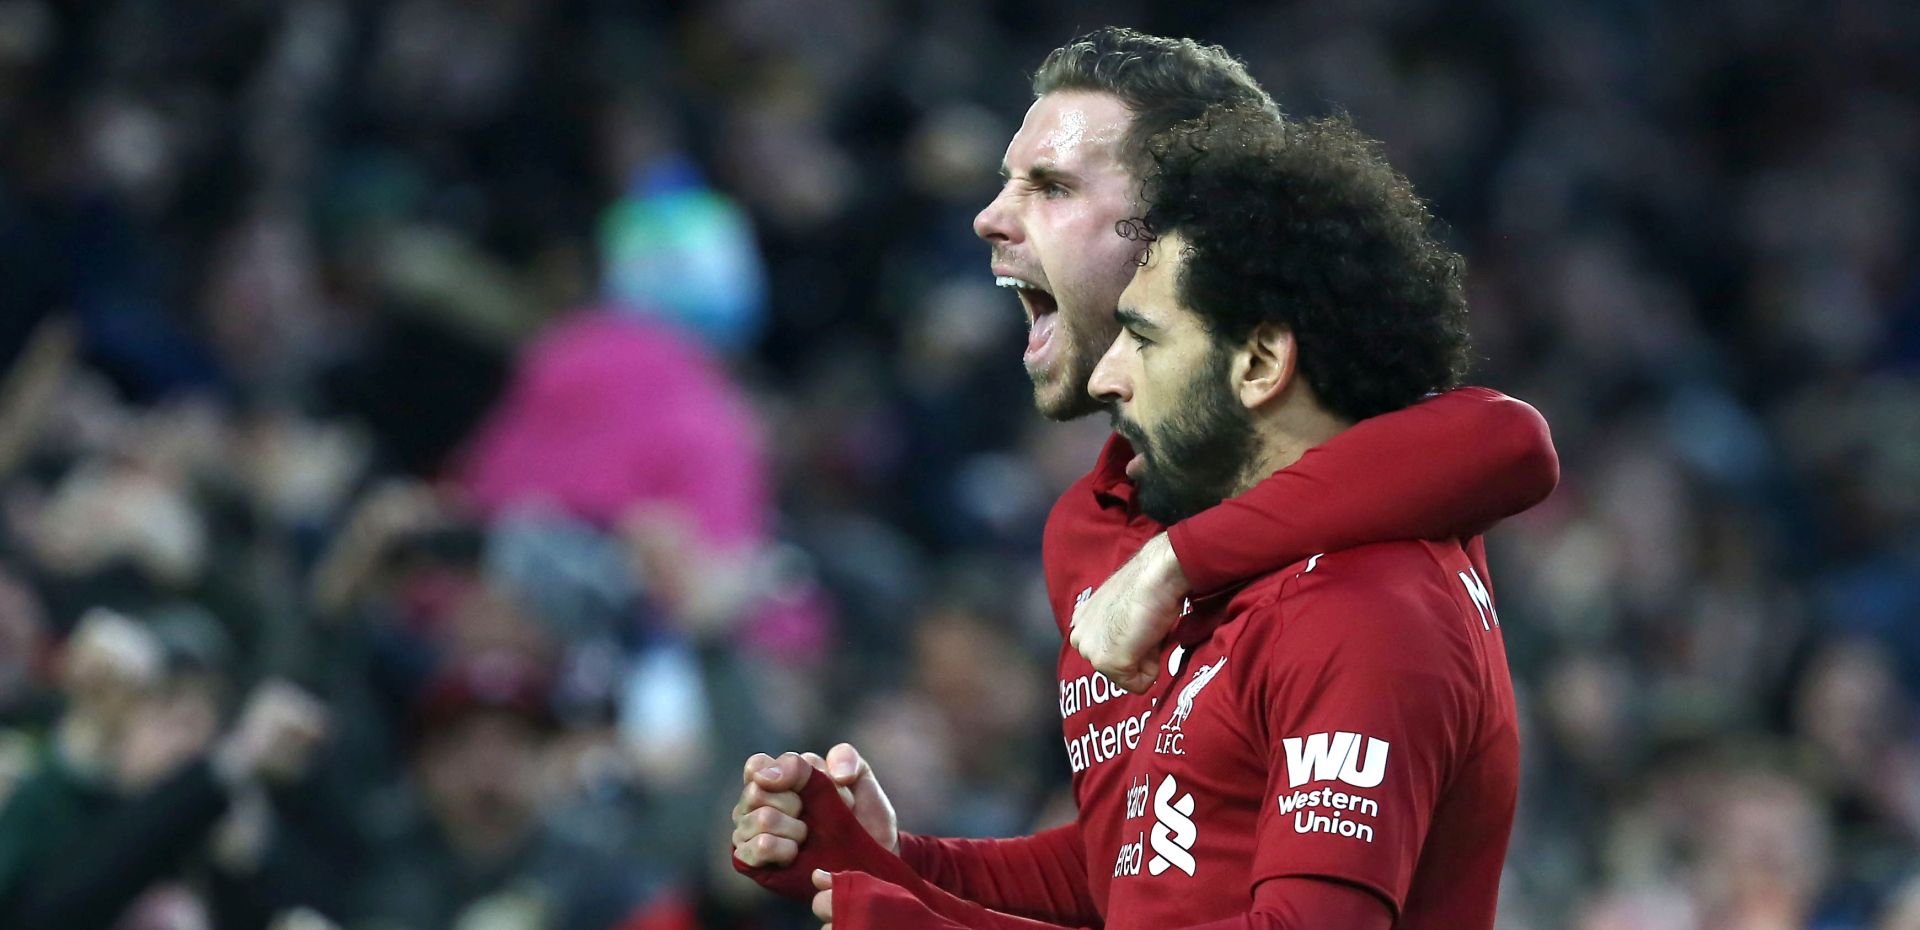 epa07278065 Liverpool's Mohamed Salah celebrates scoring the opening goal with  teammate Jordan Henderson during the English Premier League soccer match between Brighton Hove Albion and Liverpool at the Amex Stadium in Brighton, Britain, 12 January 2019.  EPA/James Boardman EDITORIAL USE ONLY. No use with unauthorized audio, video, data, fixture lists, club/league logos or 'live' services. Online in-match use limited to 120 images, no video emulation. No use in betting, games or single club/league/player publications